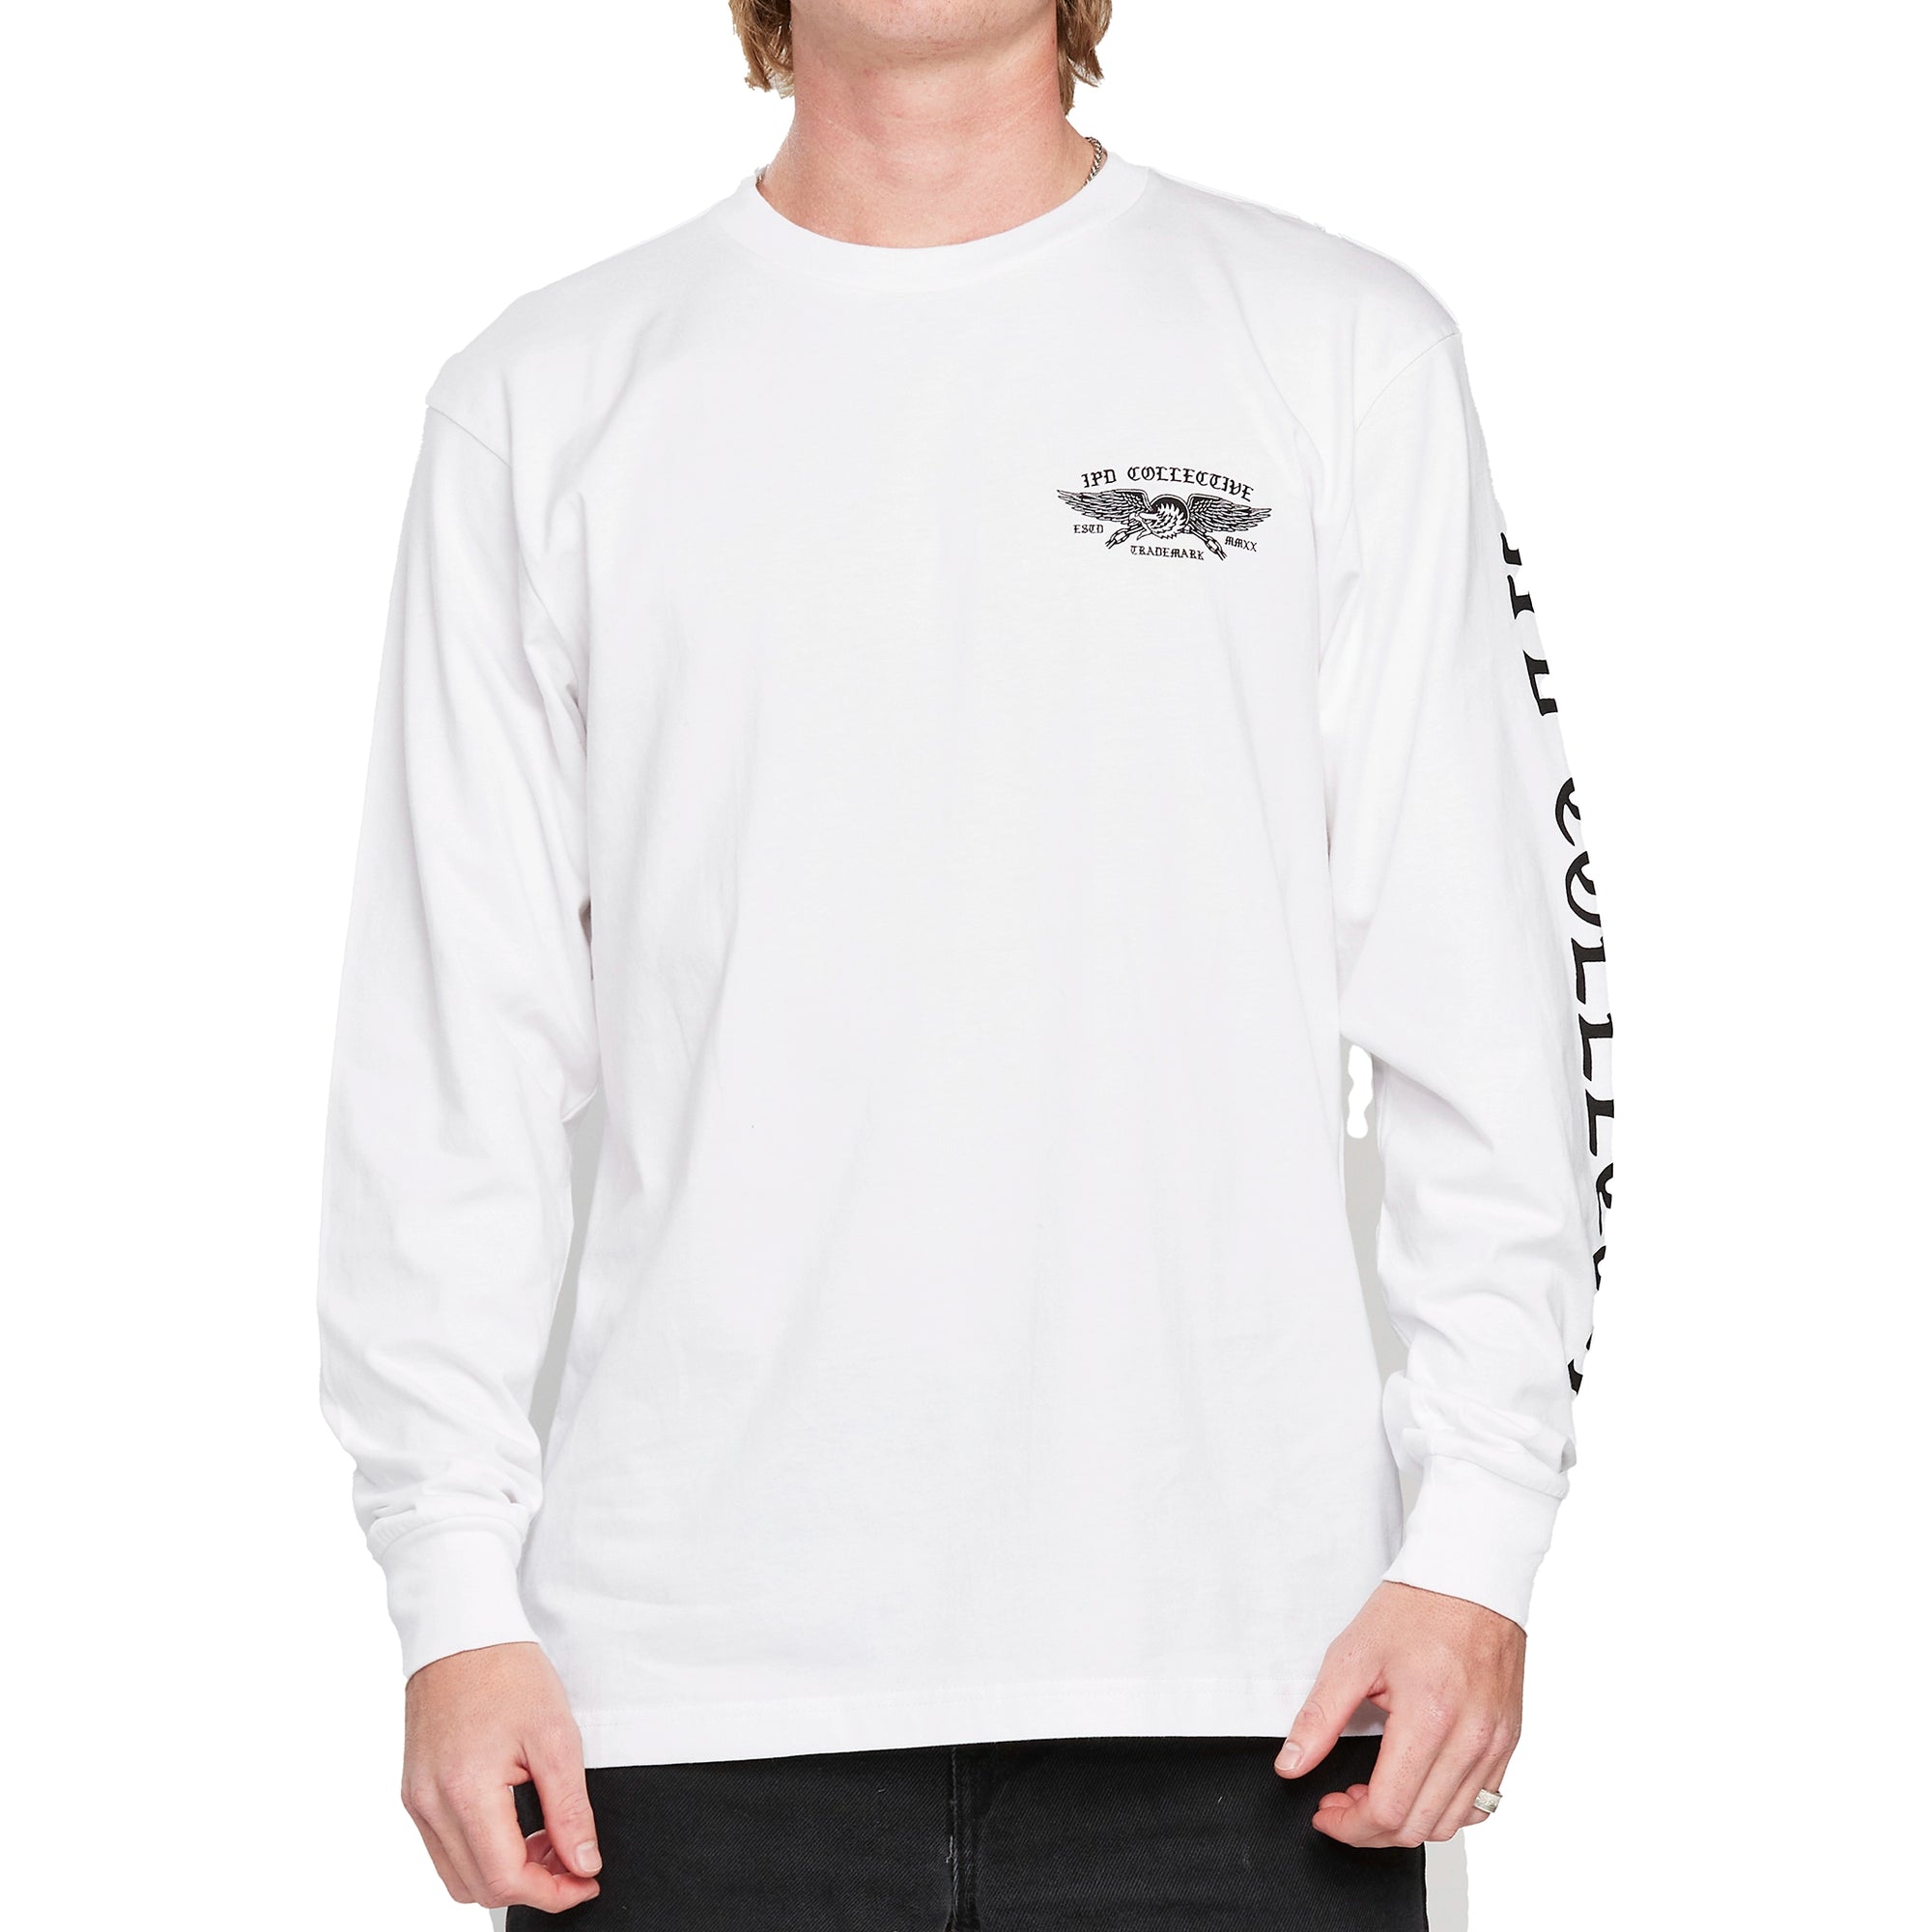 Back view of a white long sleeve tee with a large printed black emblem of an old ship sailing at sea. Above the emblem is an eagle spreading its wings with two American flags on each side. Below the emblem is a rose with symmetrical spider webs on each side. The I P D logo is below.